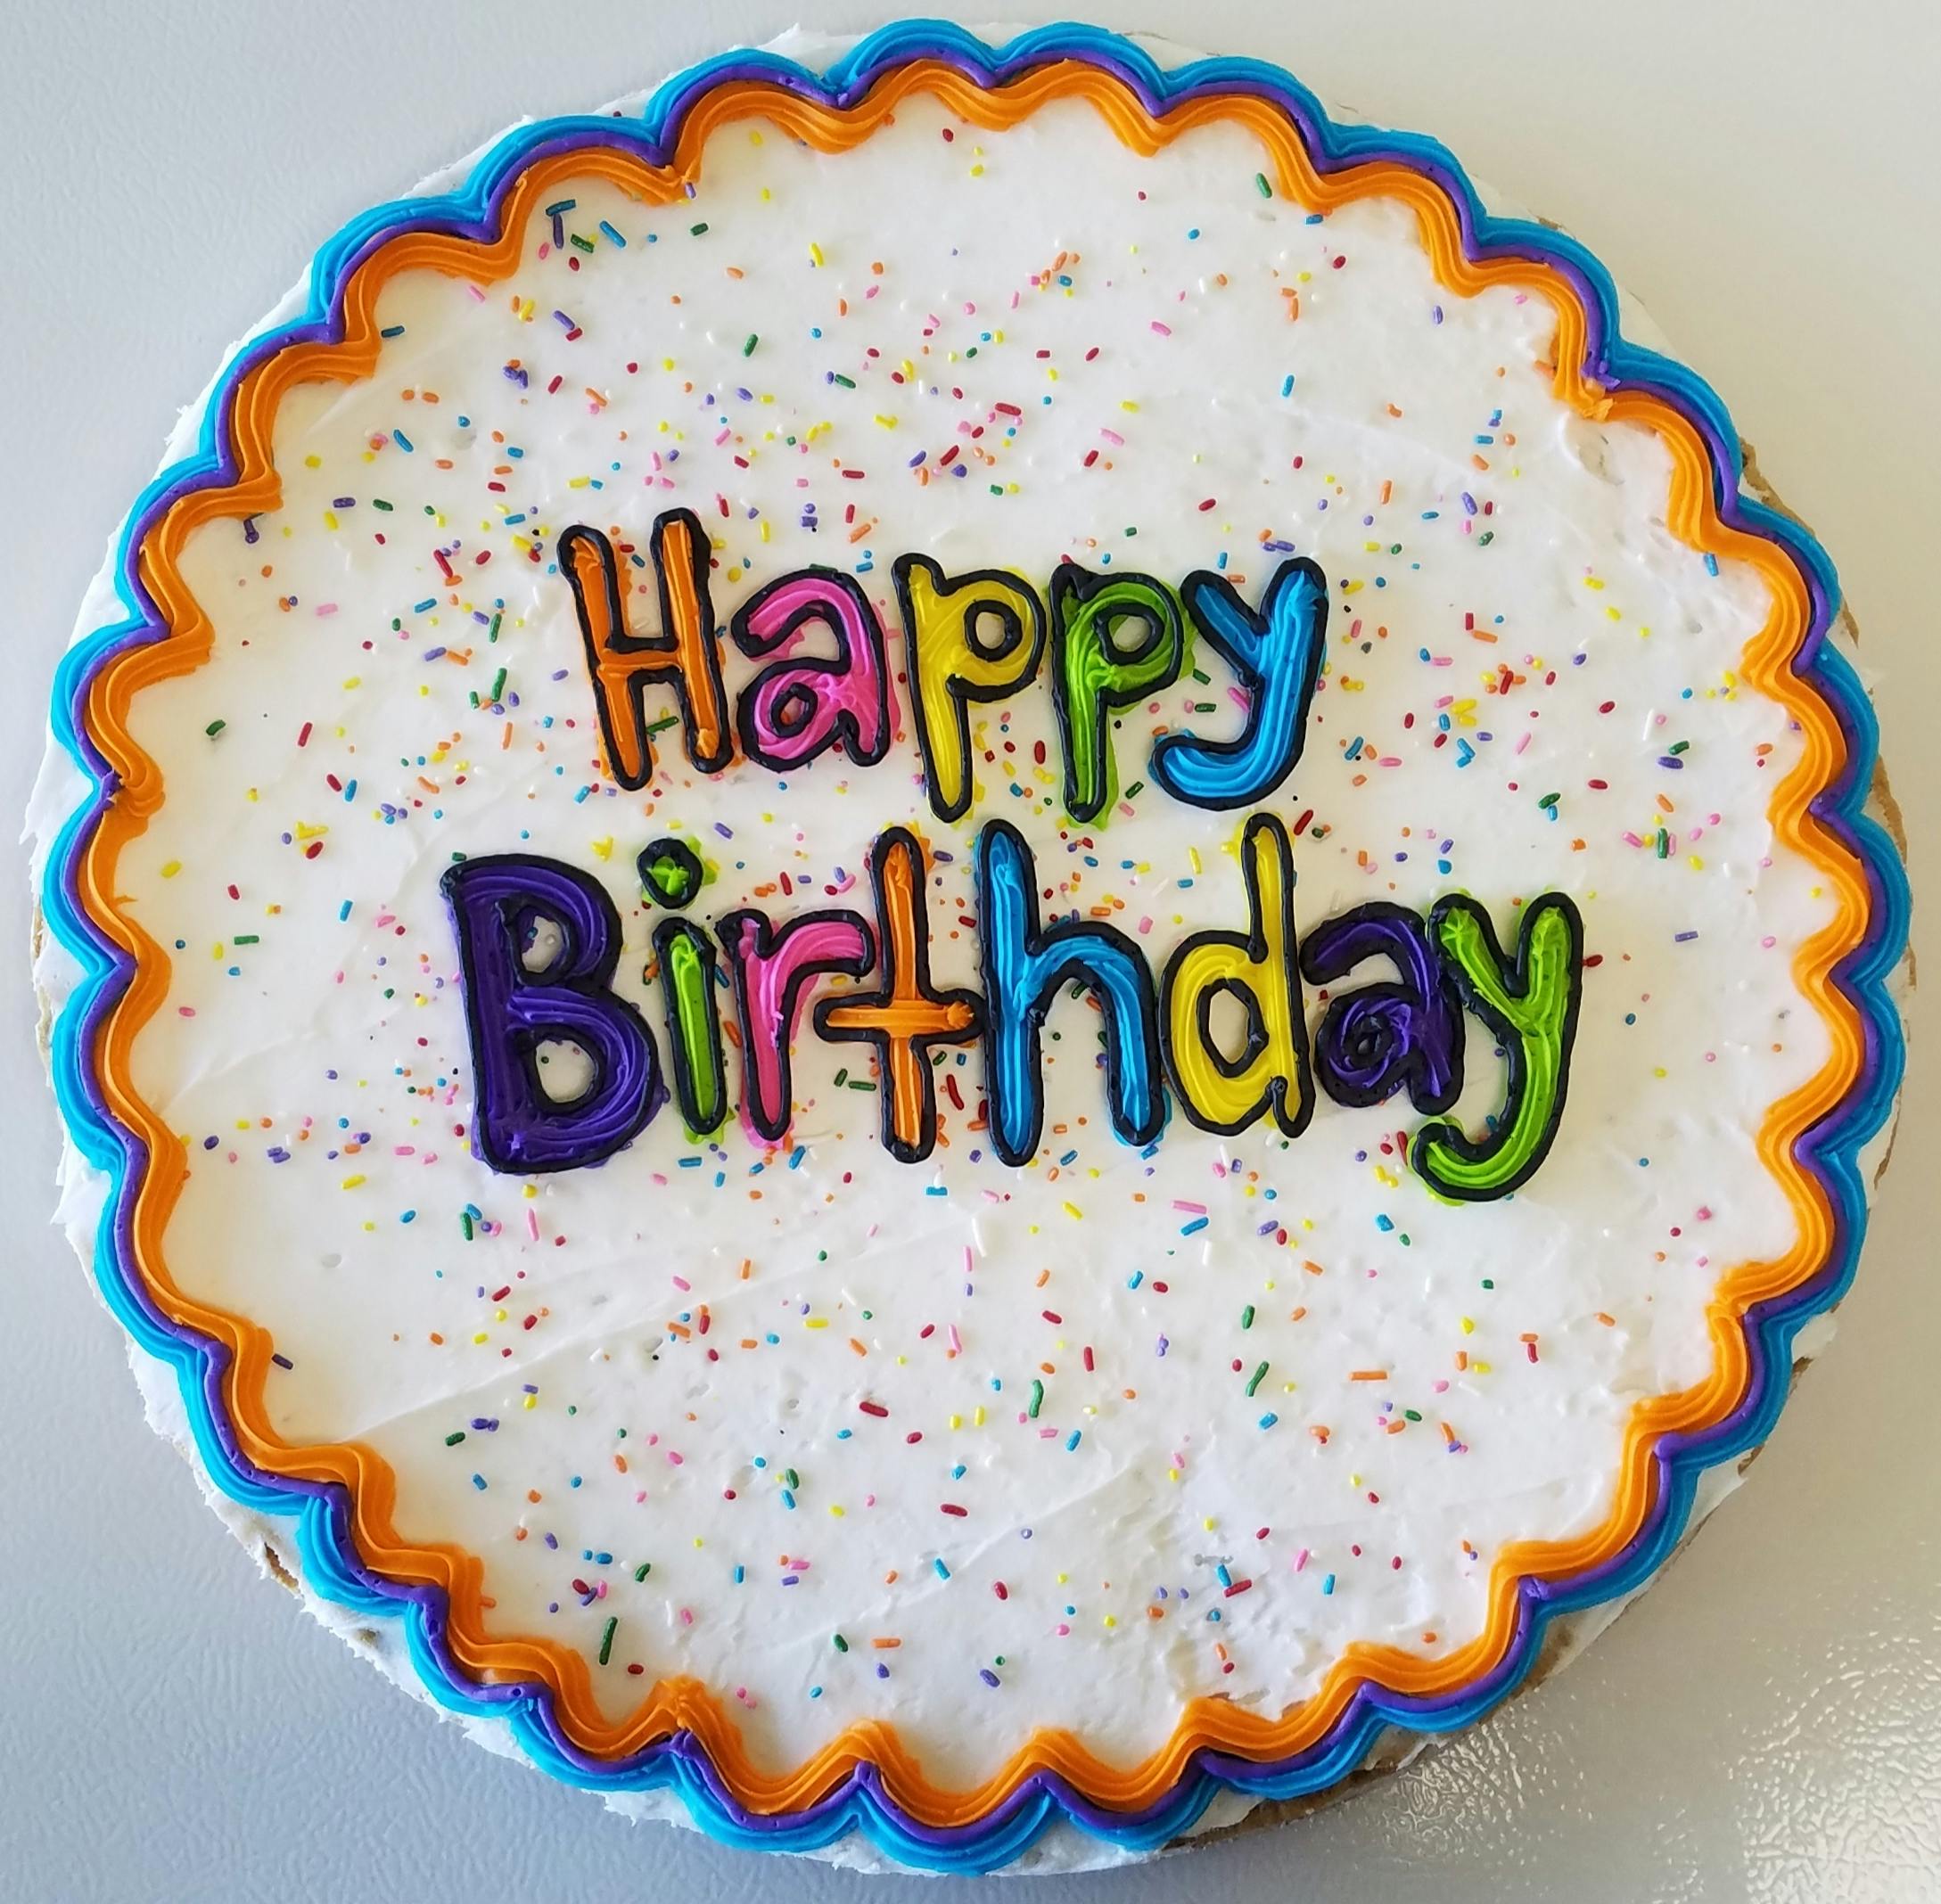 16" Decorated Cookie from Eileen's Colossal Cookies in Lawrence, KS